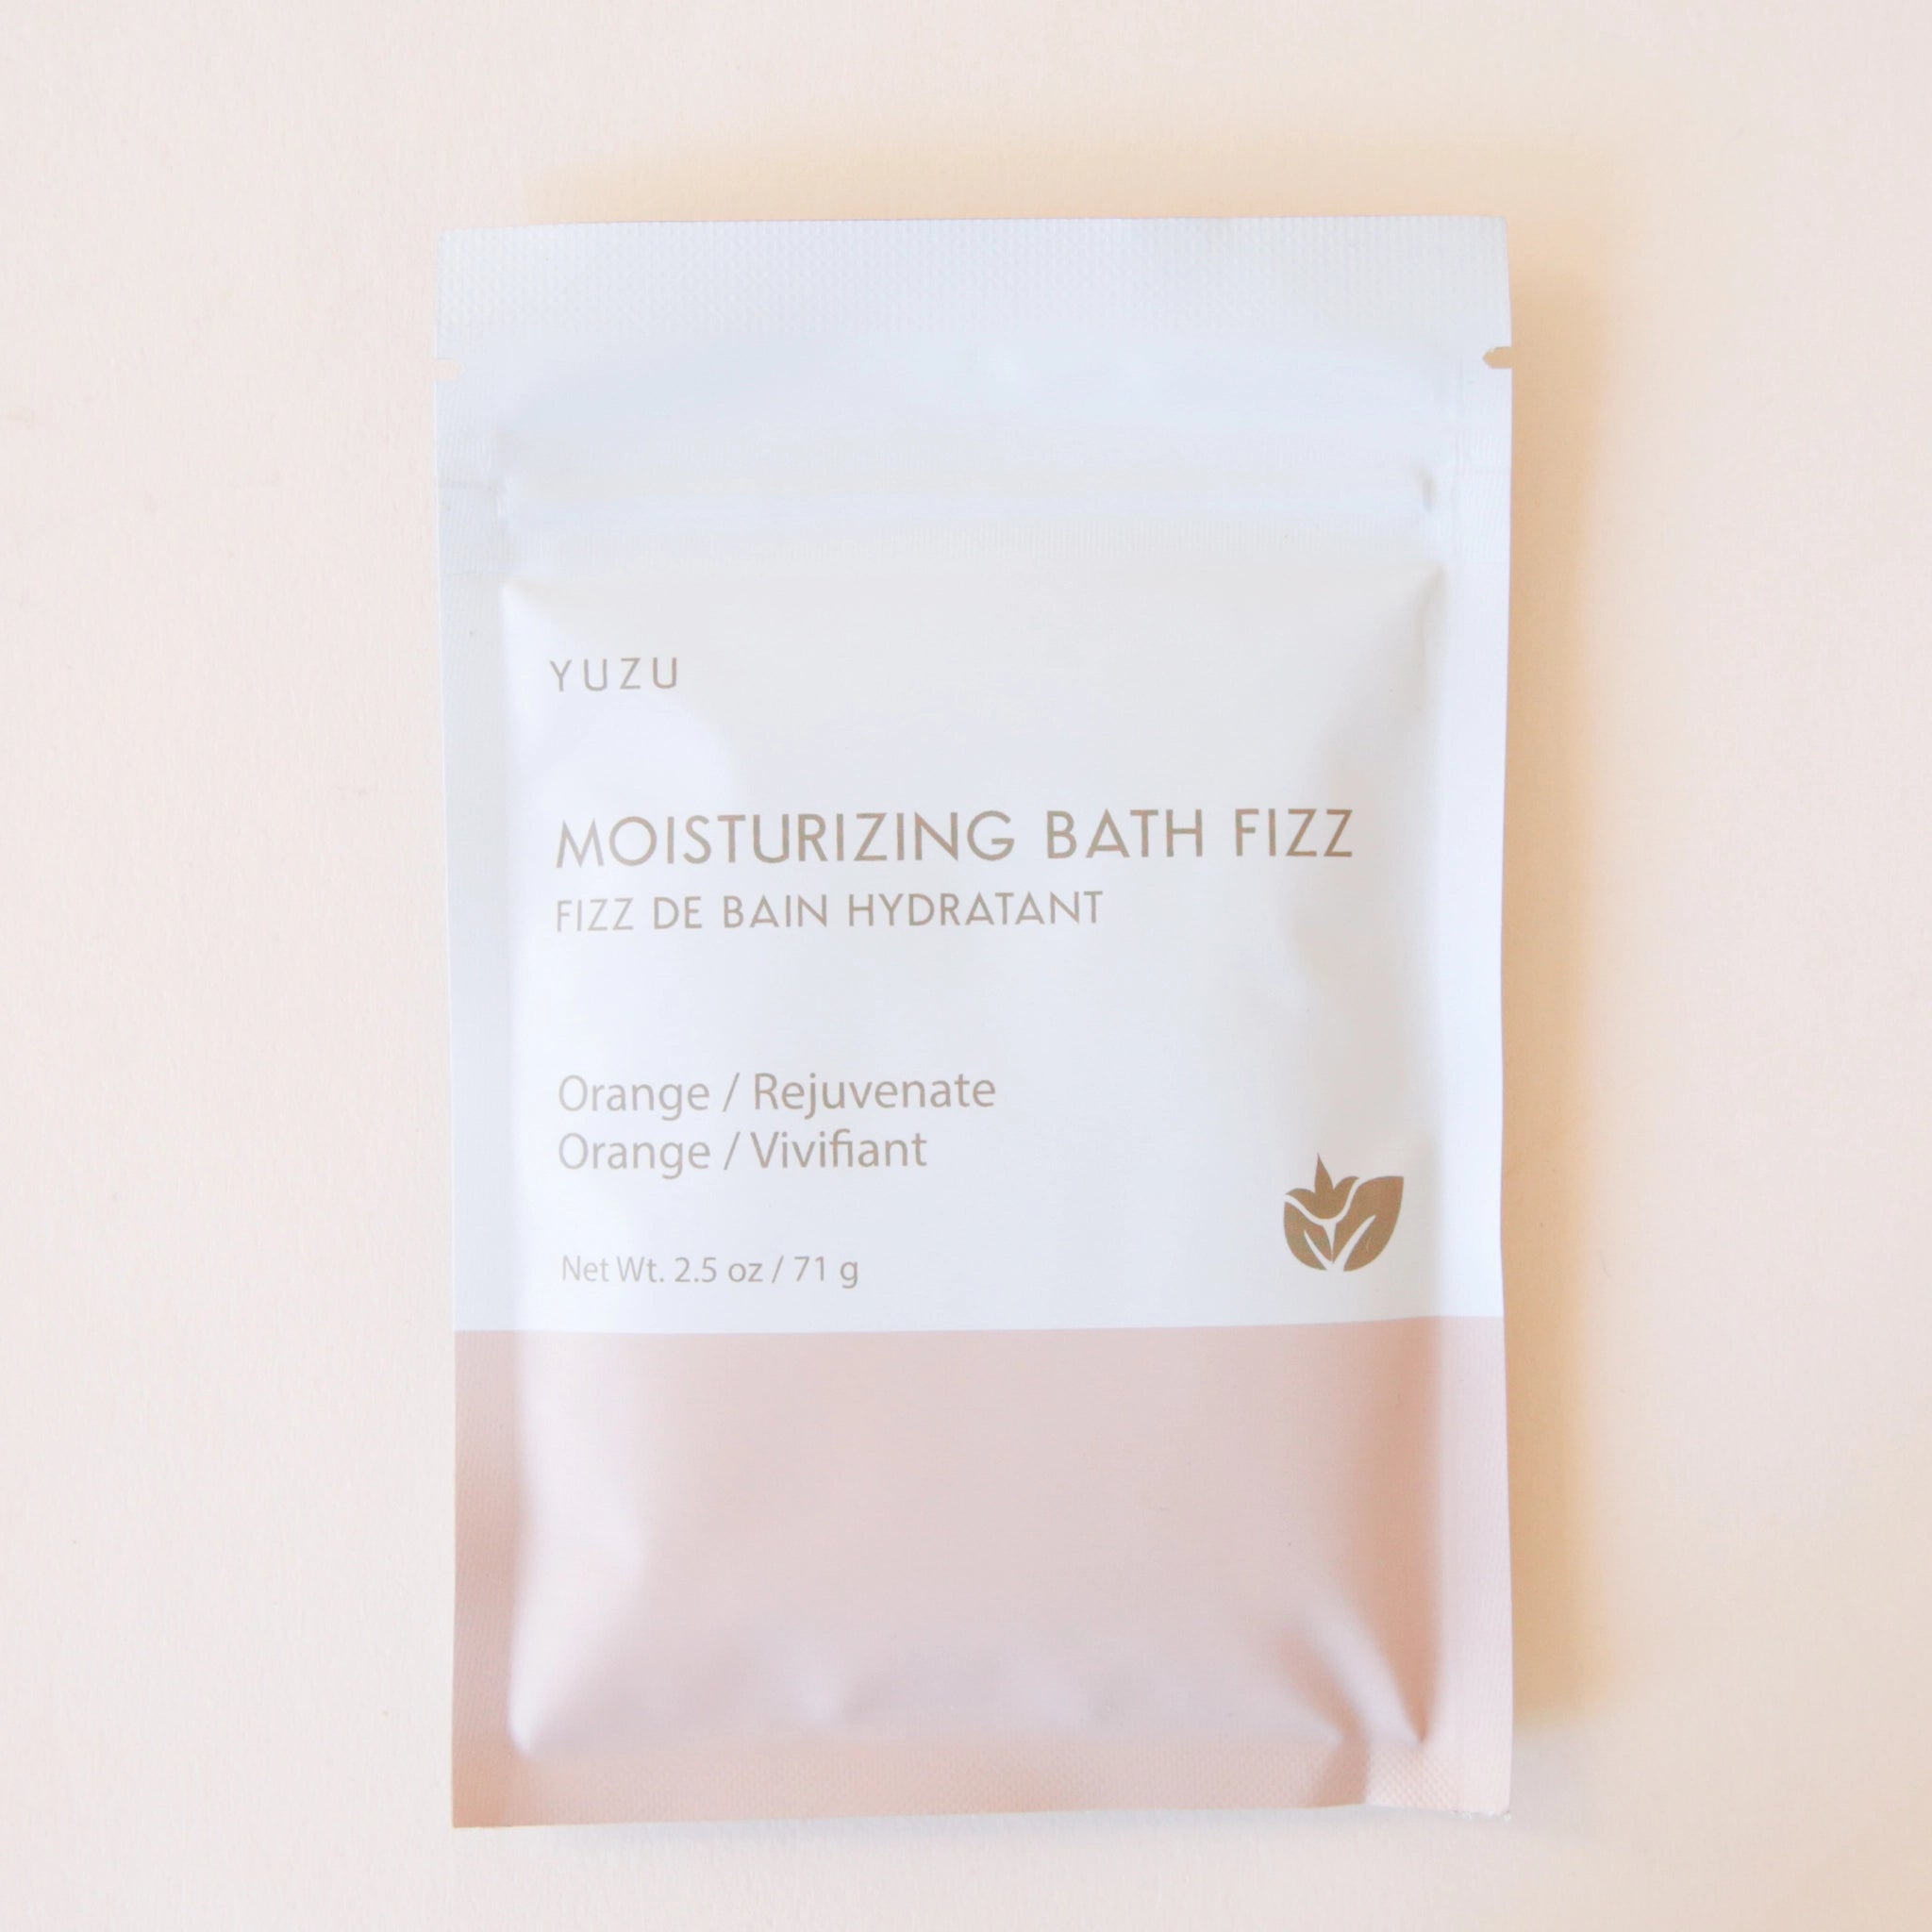 A packet of bath salts with the bottom half a light pink color and the top half white along with text on the front that reads, "Moisturizing Bath Fizz, Orange / Rejuvenate".